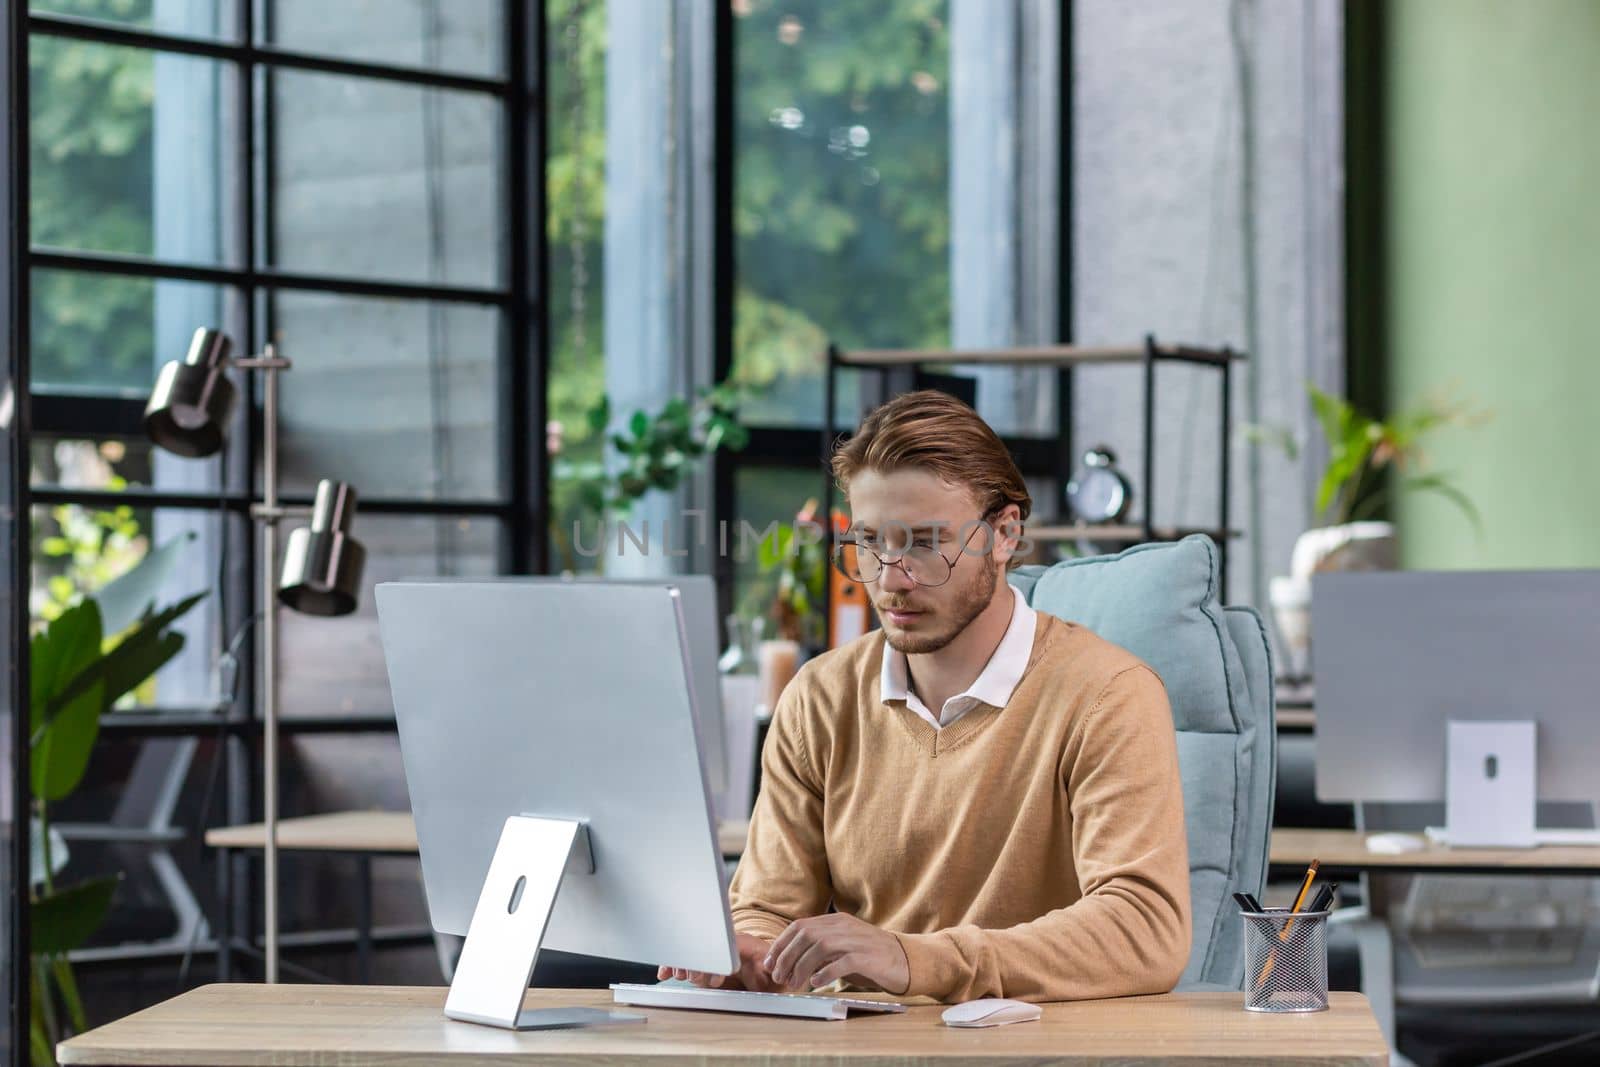 Serious and scorn-centered man in the office at work with a computer, man typing thoughtfully on keyboards, businessman young blond in sweater indoors loft, with green colors, programmer at work by voronaman